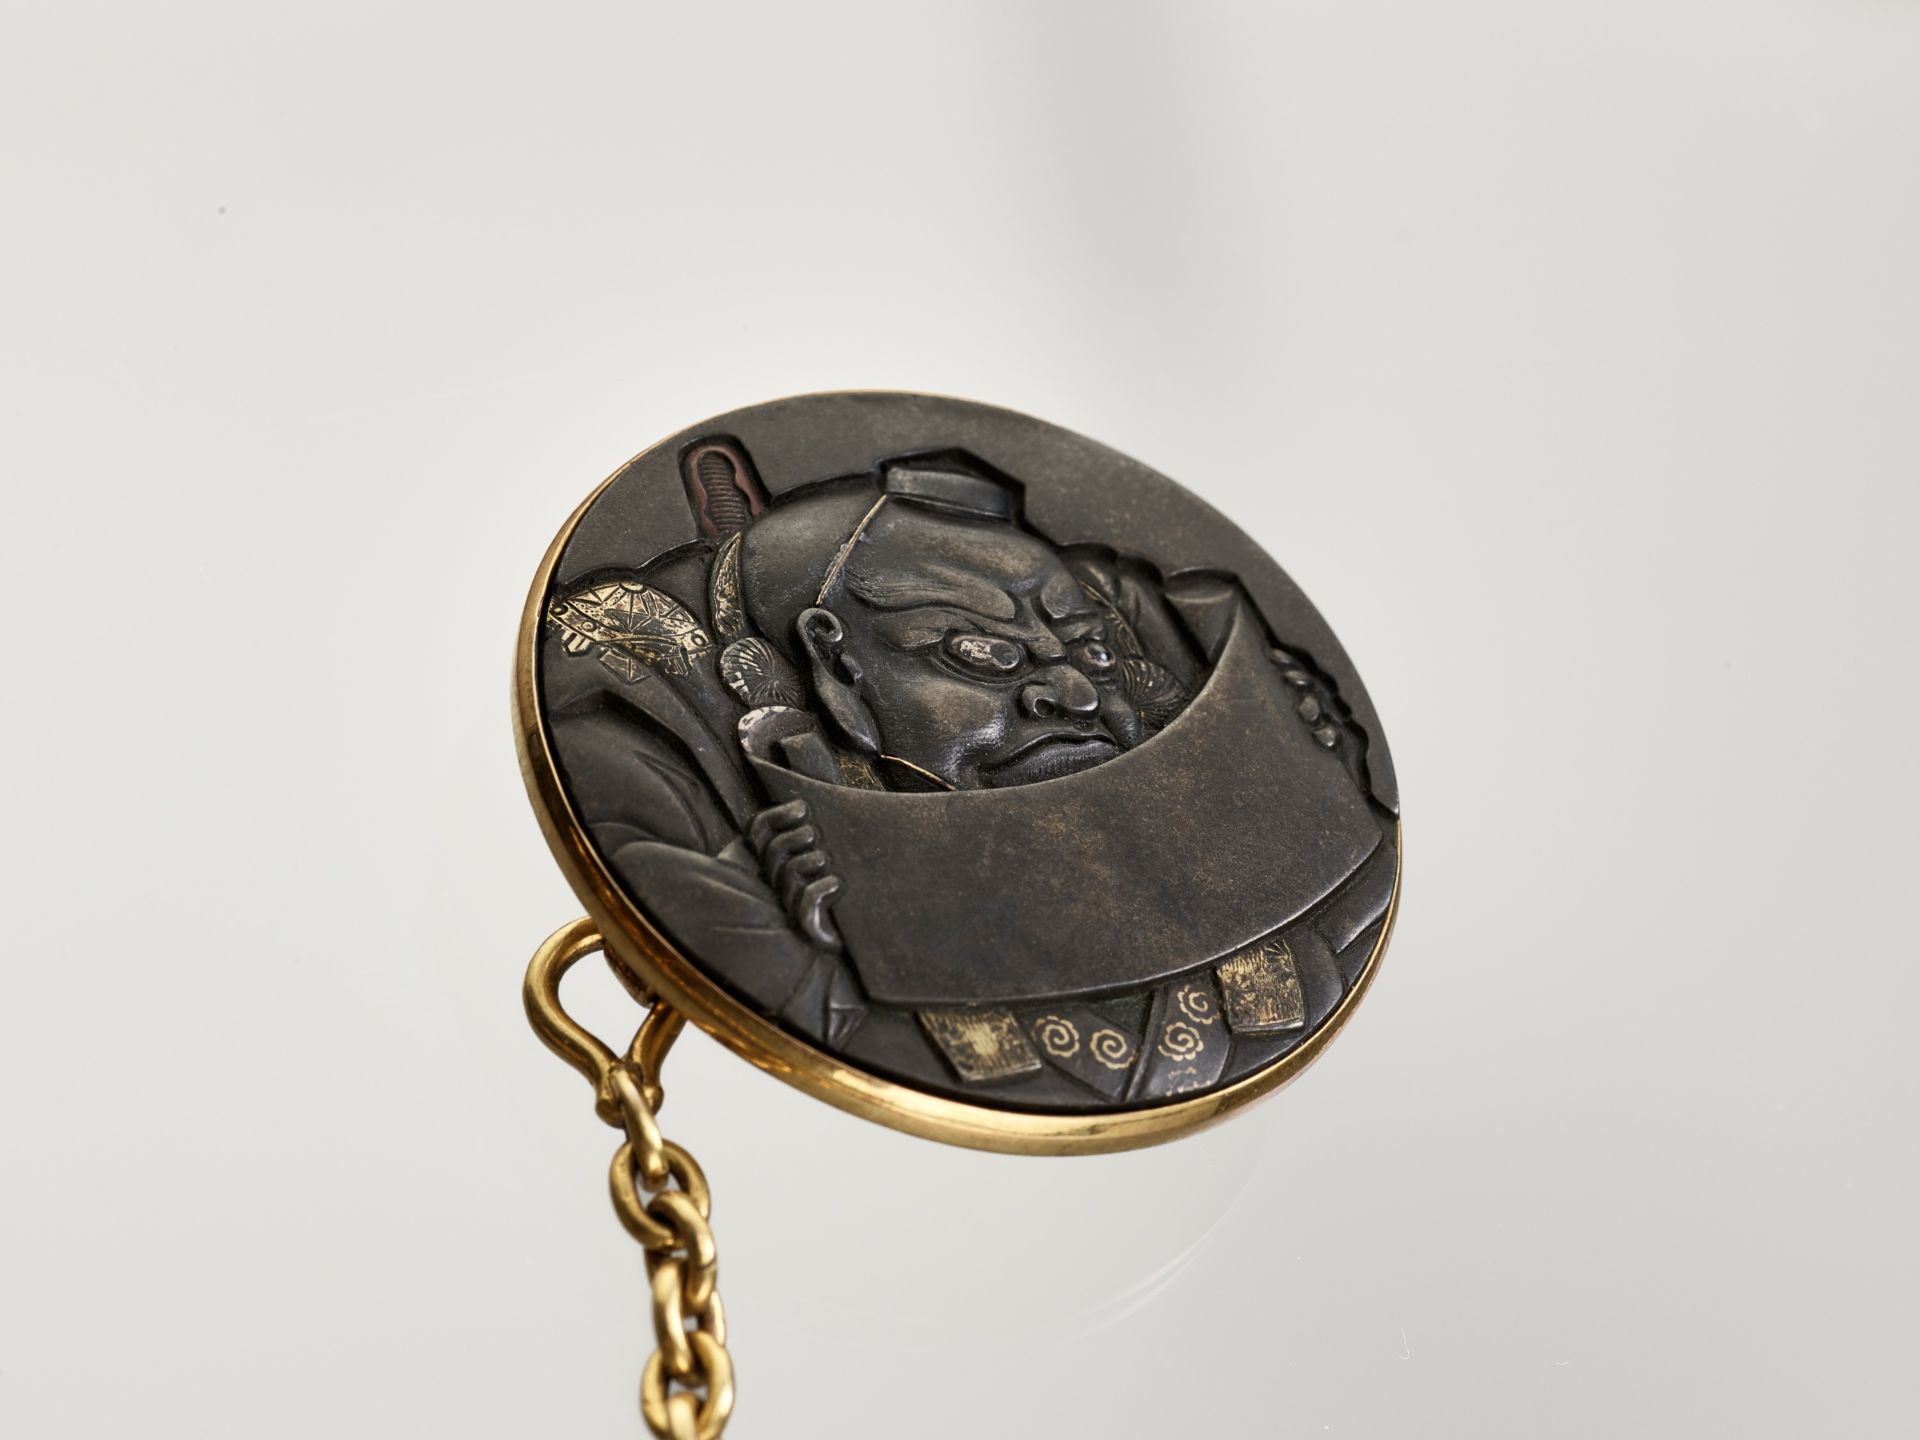 A PAIR OF FINE KANAMONO (POUCH FITTINGS) DEPICTING EMMA-O AND BENKEI - Image 3 of 6